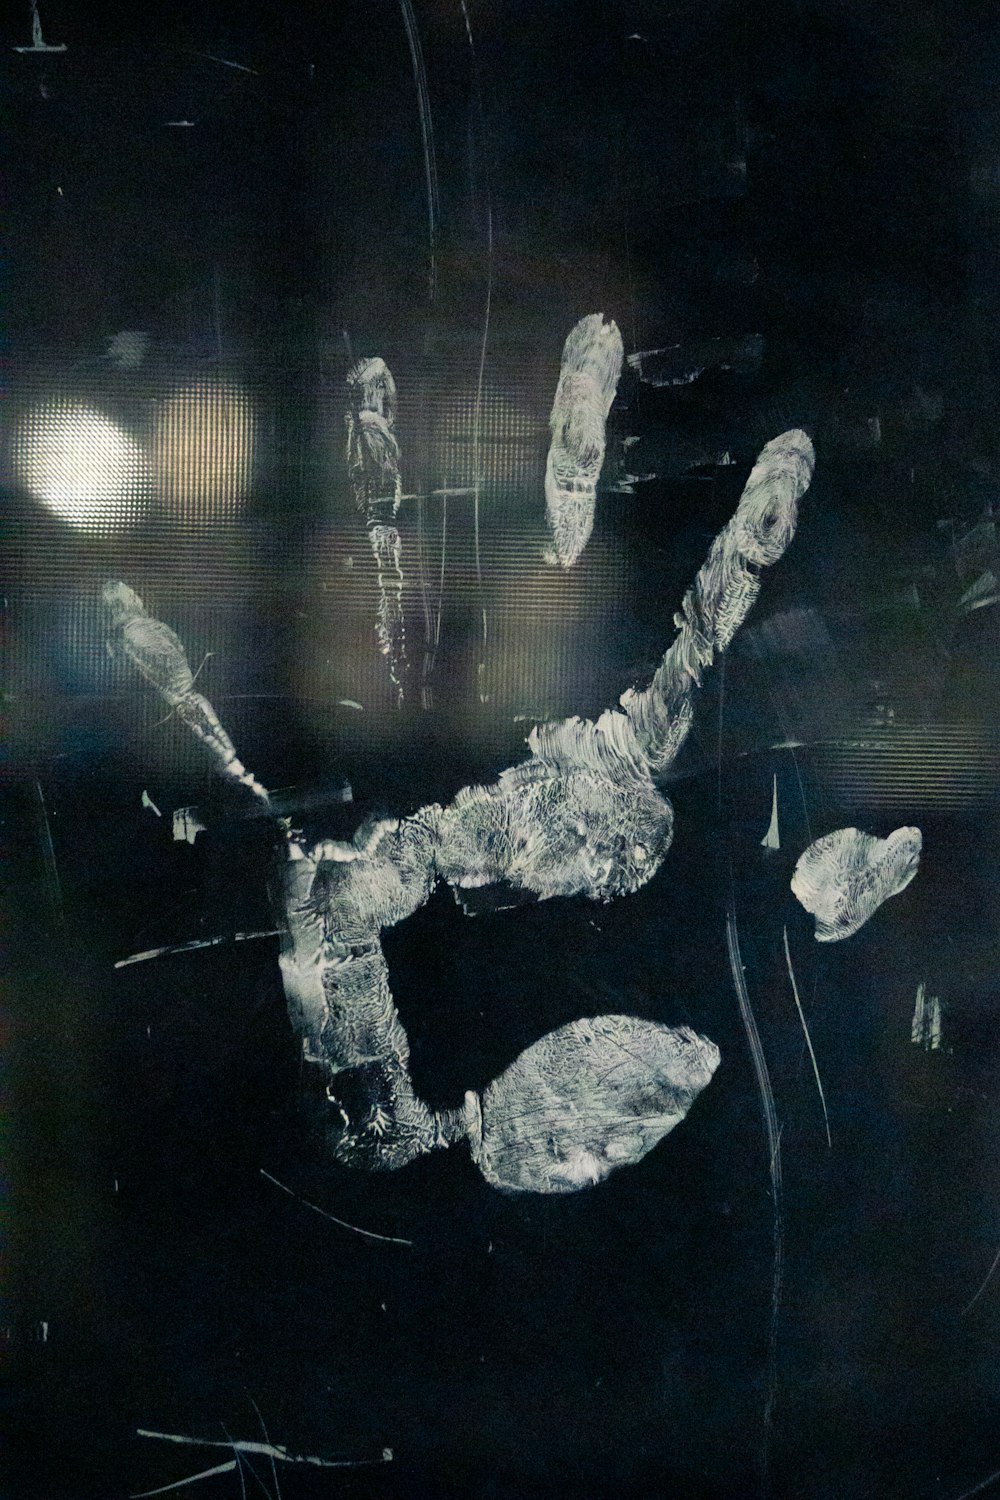 a black and white photo of a person's hand and foot